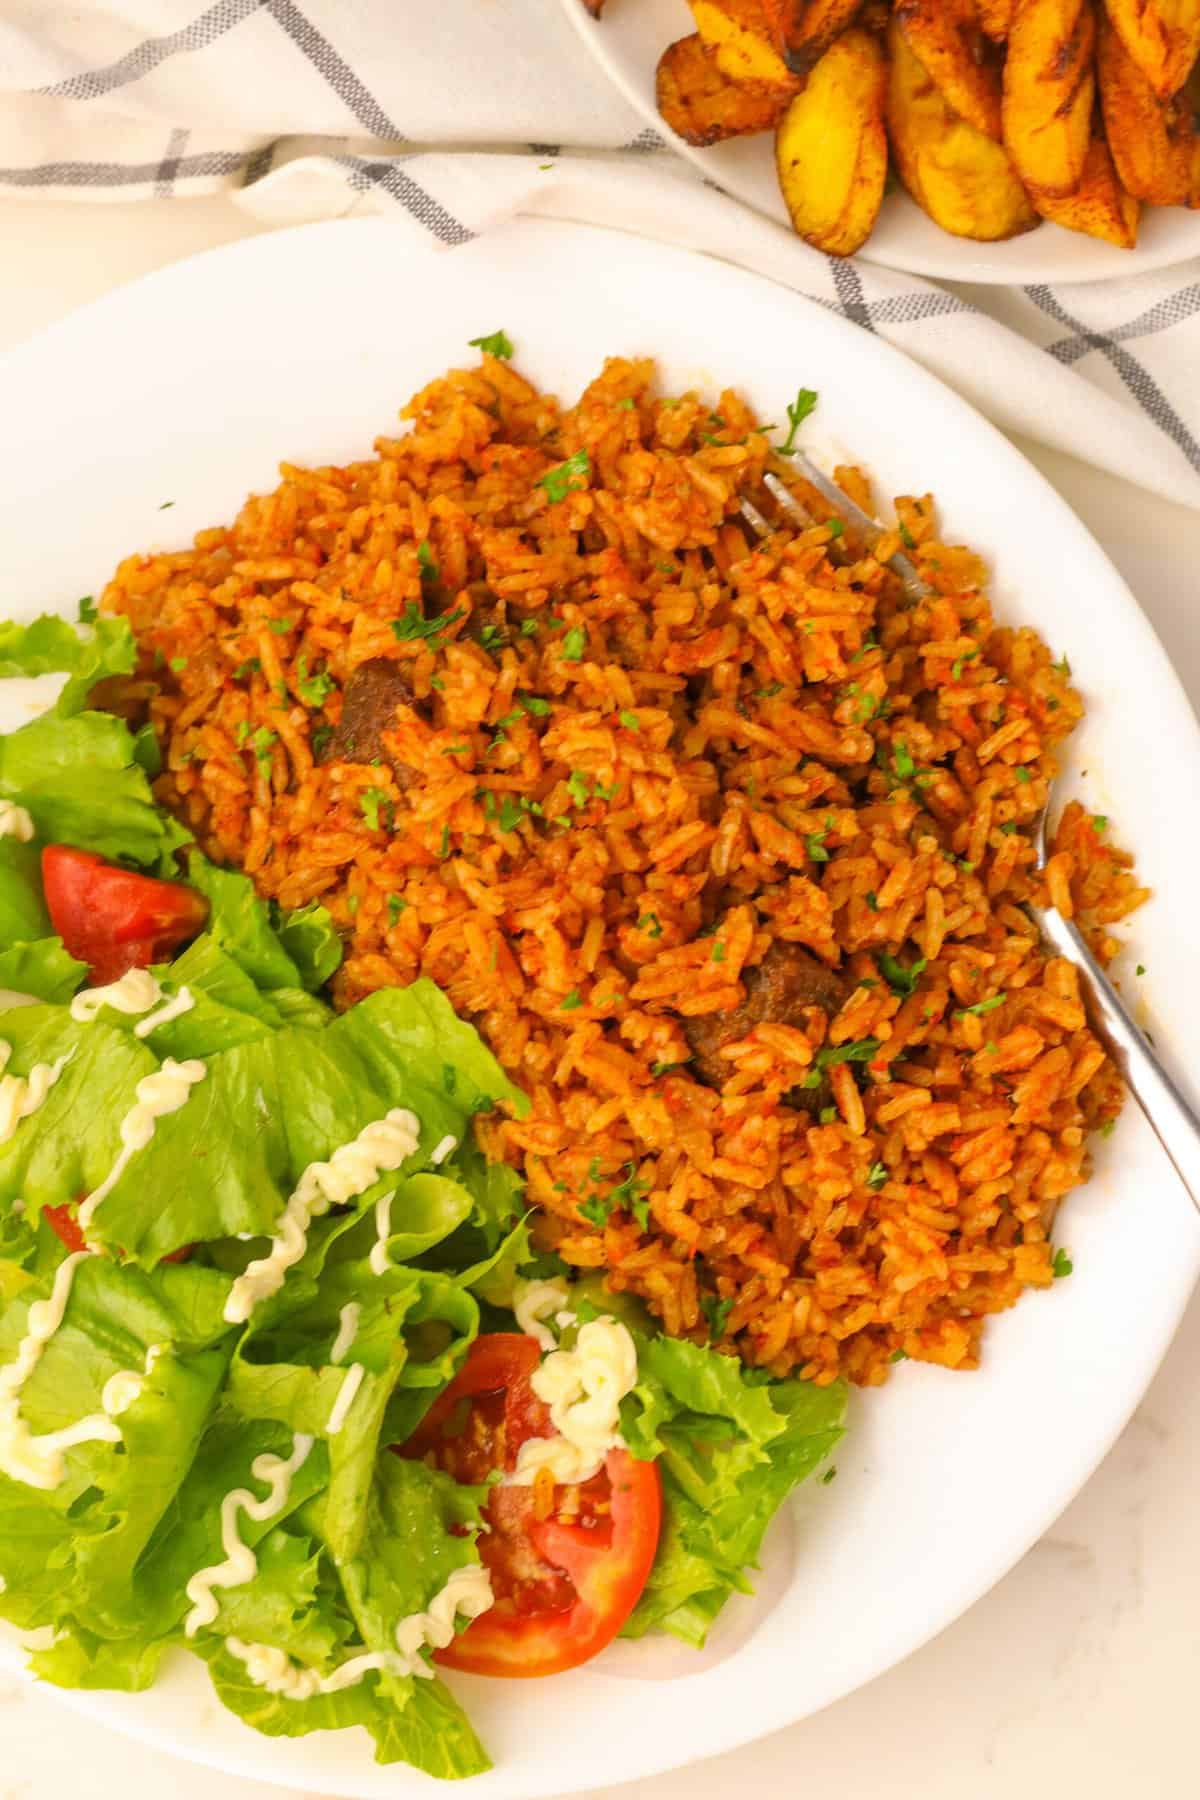 Serving up steaming hot jollof rice from Ghana with a refreshing green salad